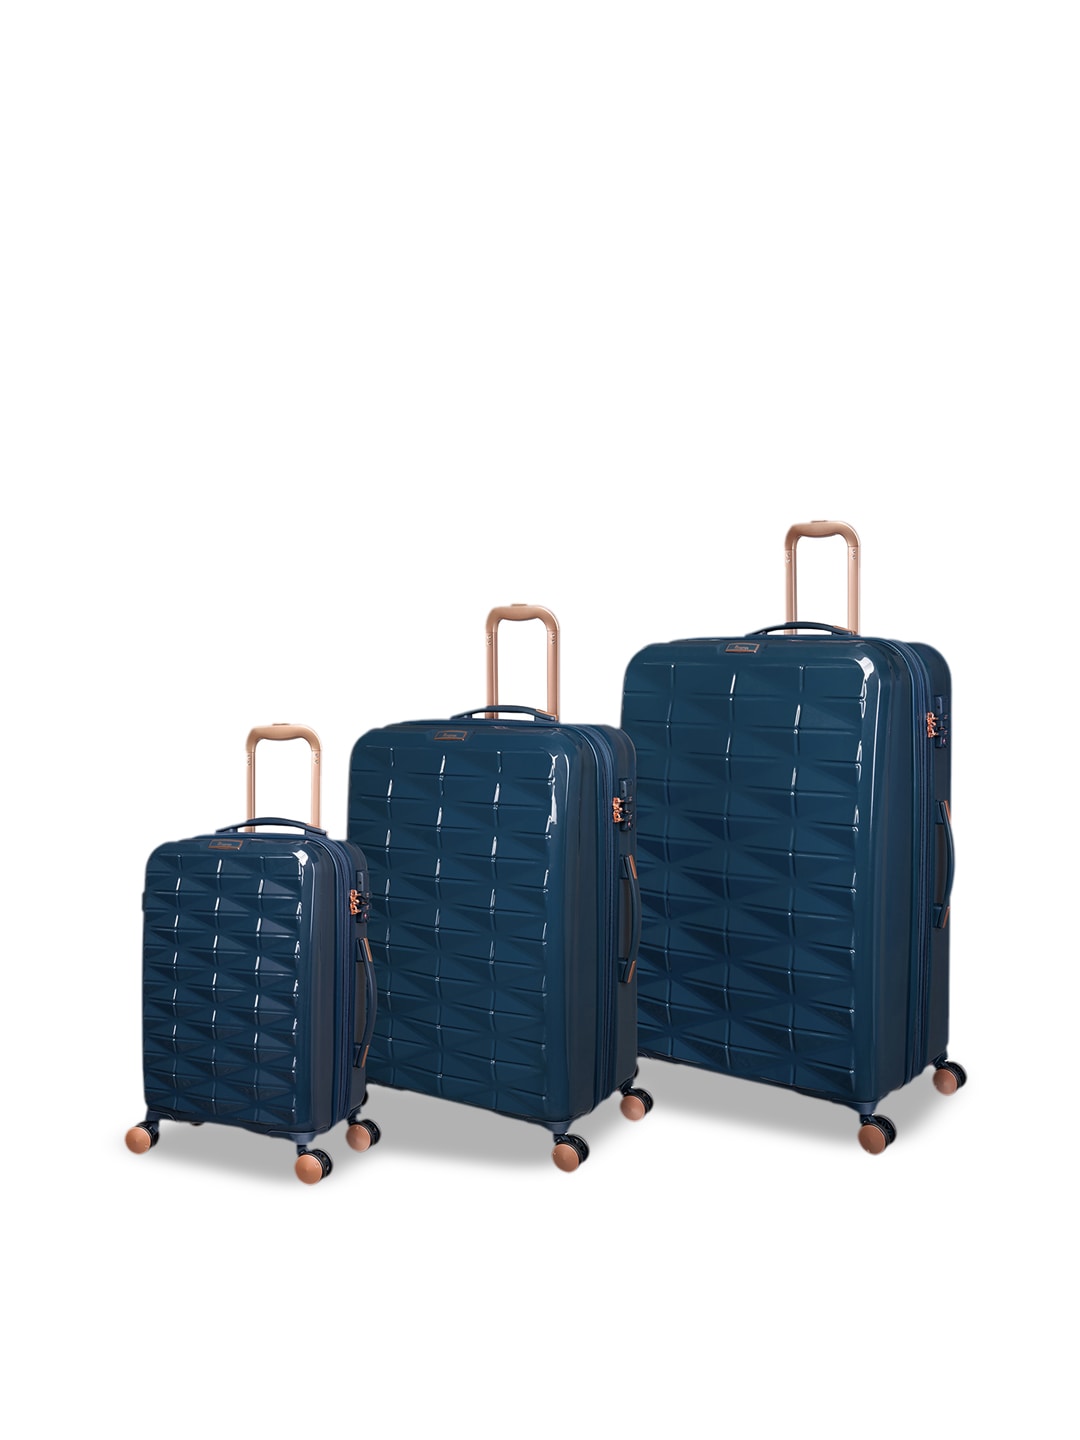 IT luggage Set Of 3 Blue Textured Hard-Sided Trolley Bag Price in India